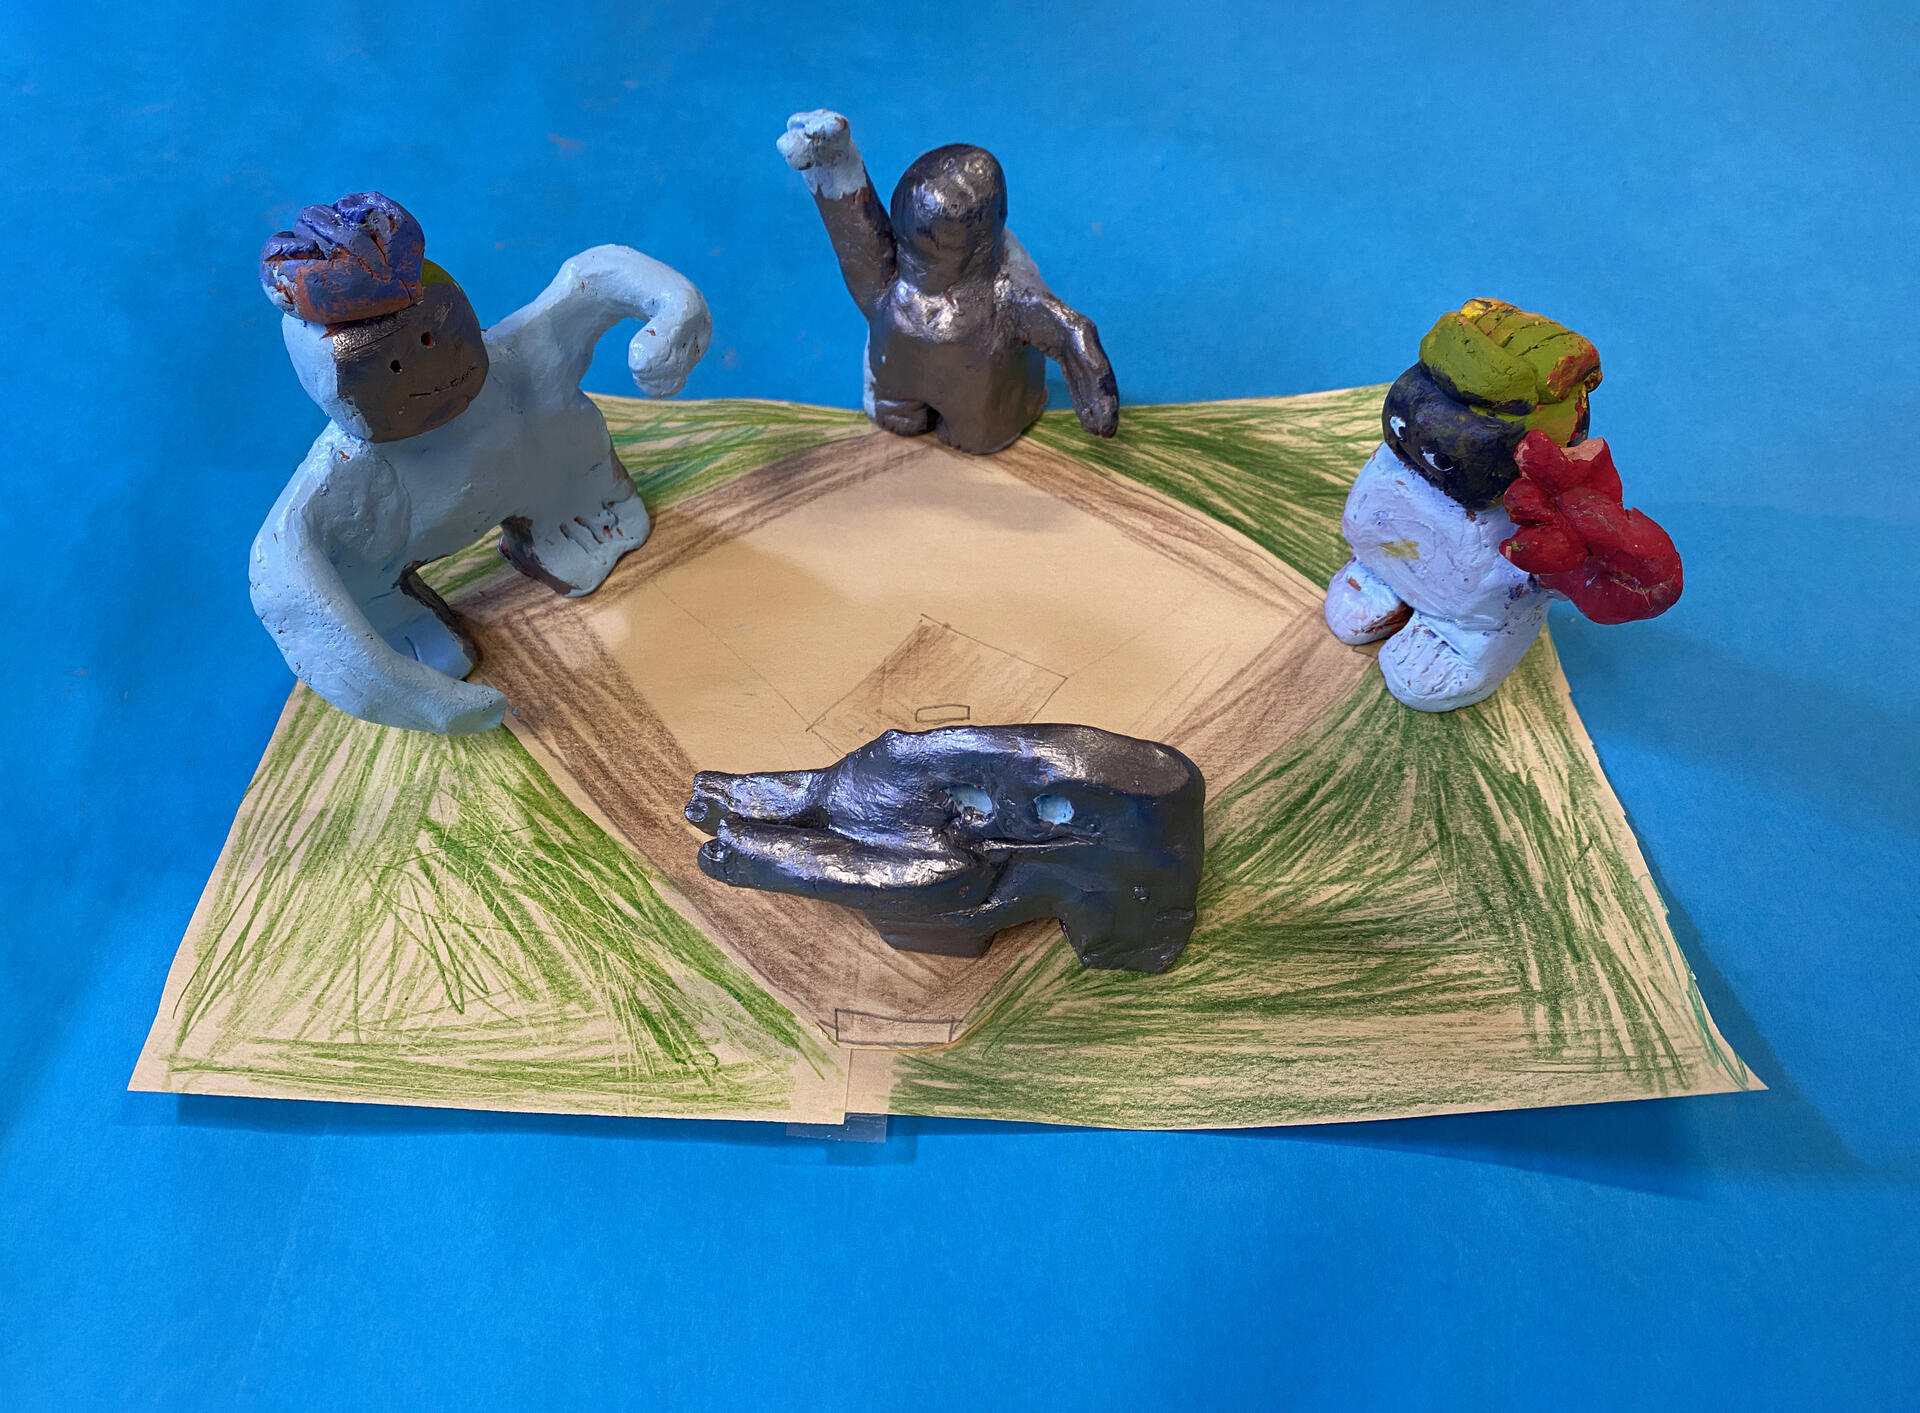 Four clay figurines stand on a hand drawn baseball diamond atop a bright blue backdrop. The figurines have been painted a combonation of silver, light blue, and red, and all have some version of outstretched arms.